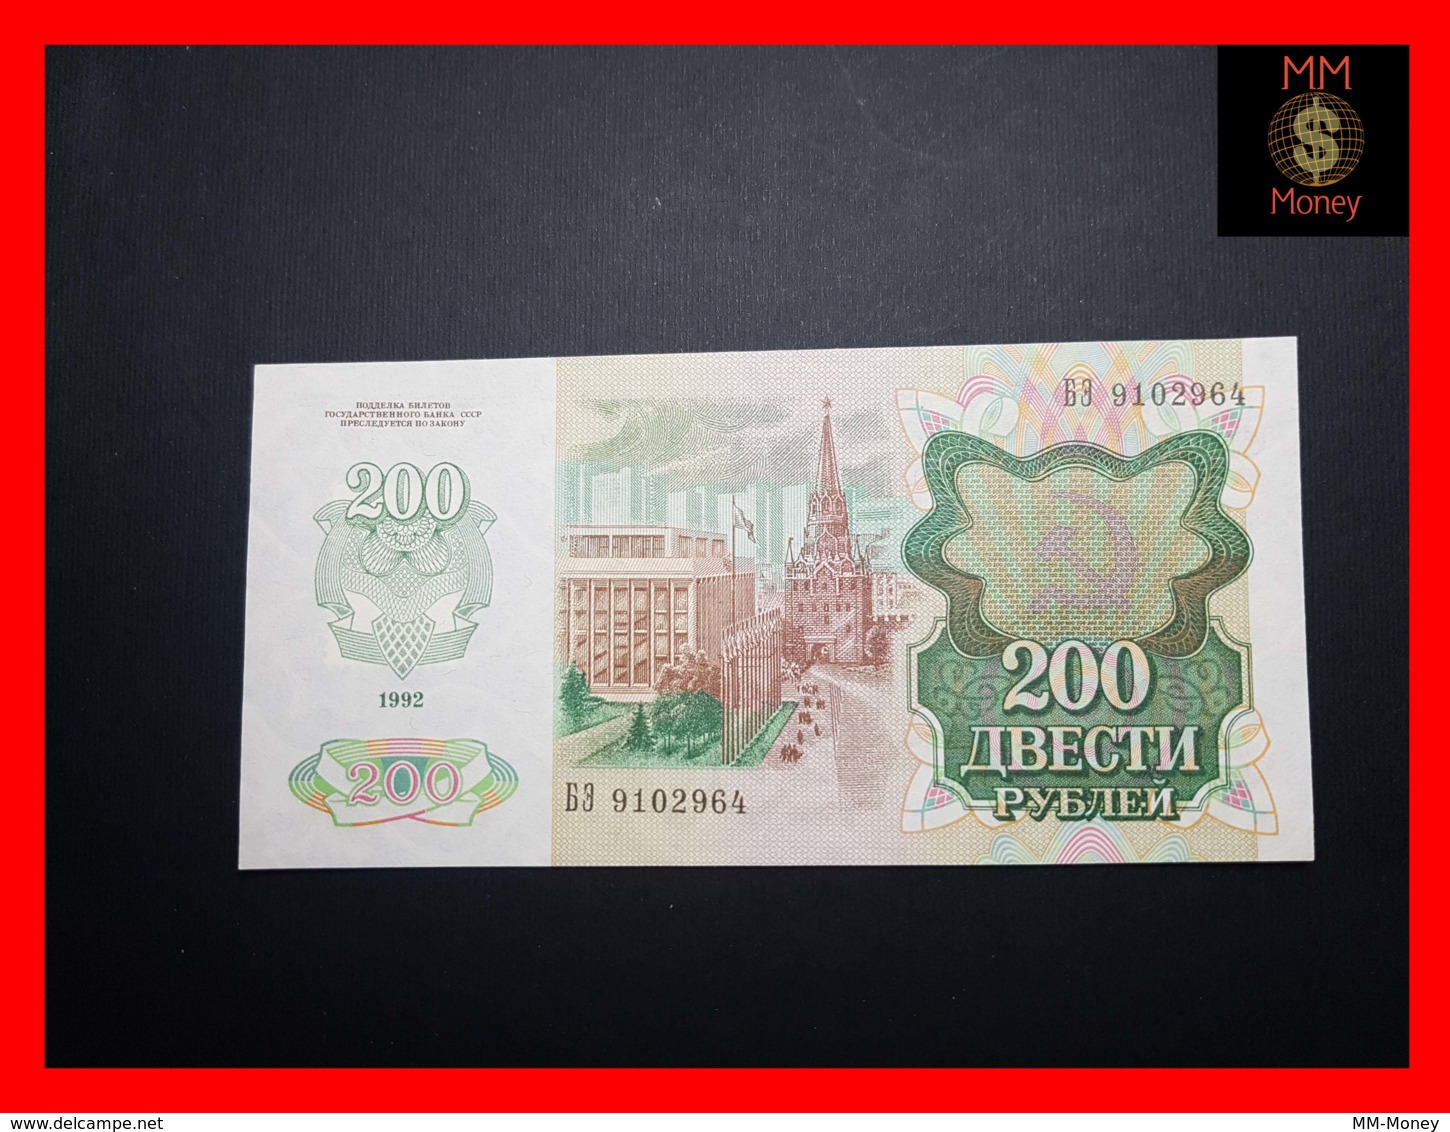 TRANSNISTRIA  200 Rubles 1994  P. 9  UNC - Other - Europe